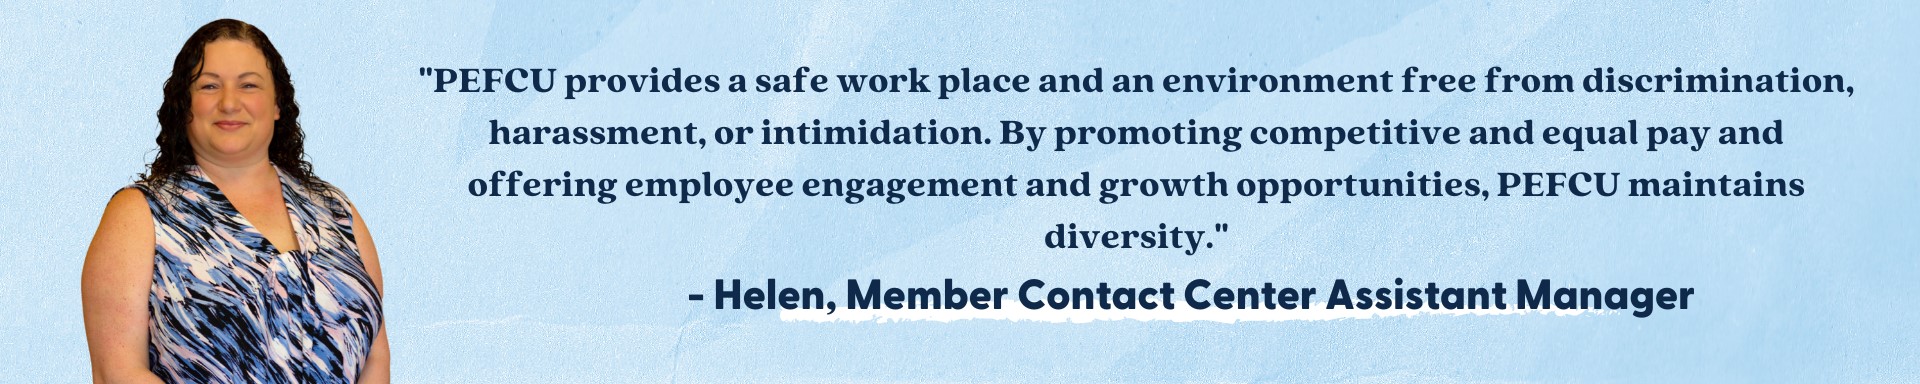 PEFCU provides a safe work place and an environment free from discrimination, harassment or intimidation.